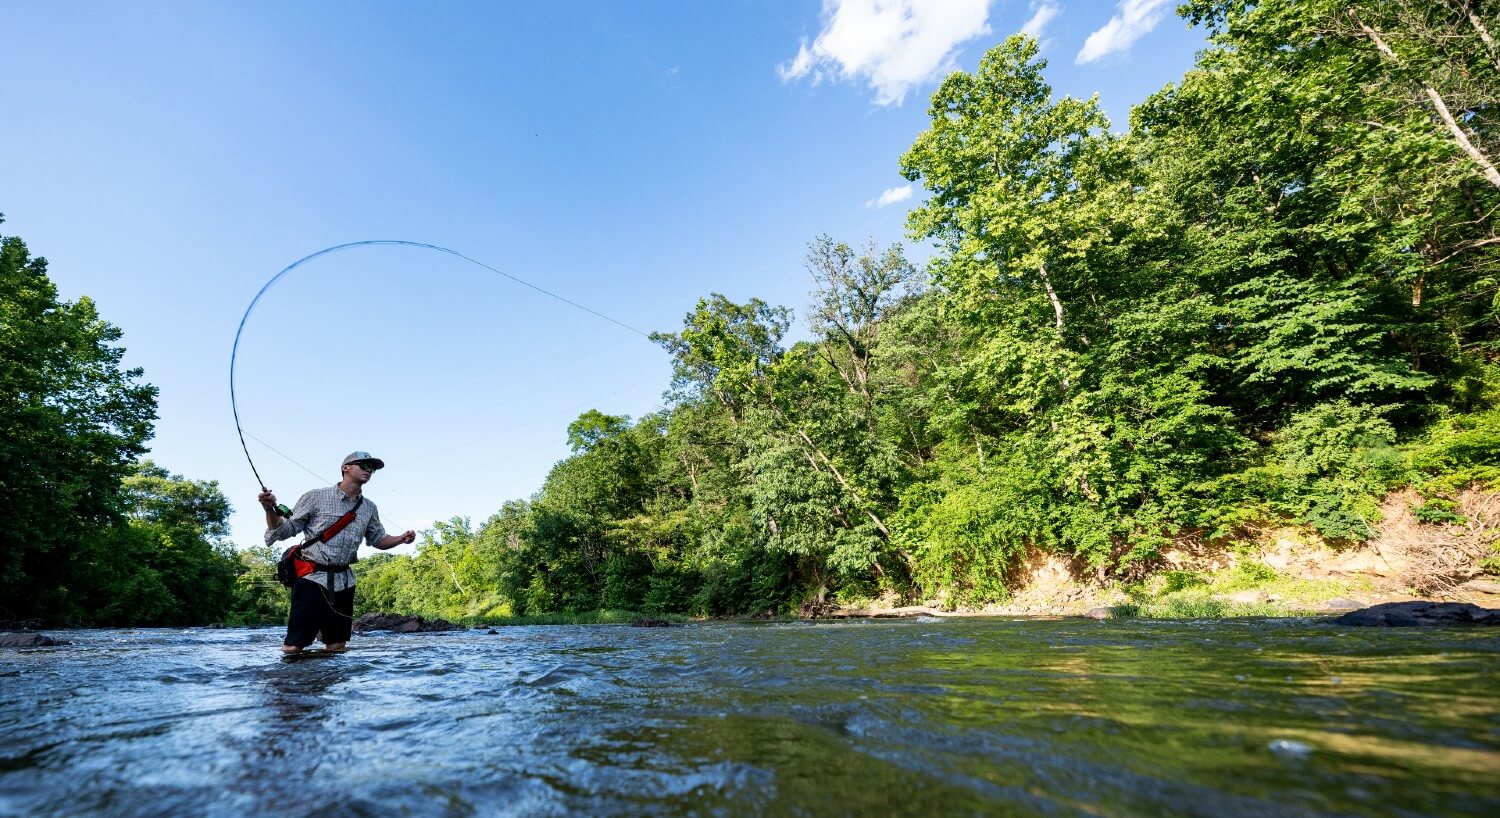 Man in cap fly fishing in a river surrounded by lush green trees and blue skies overhead